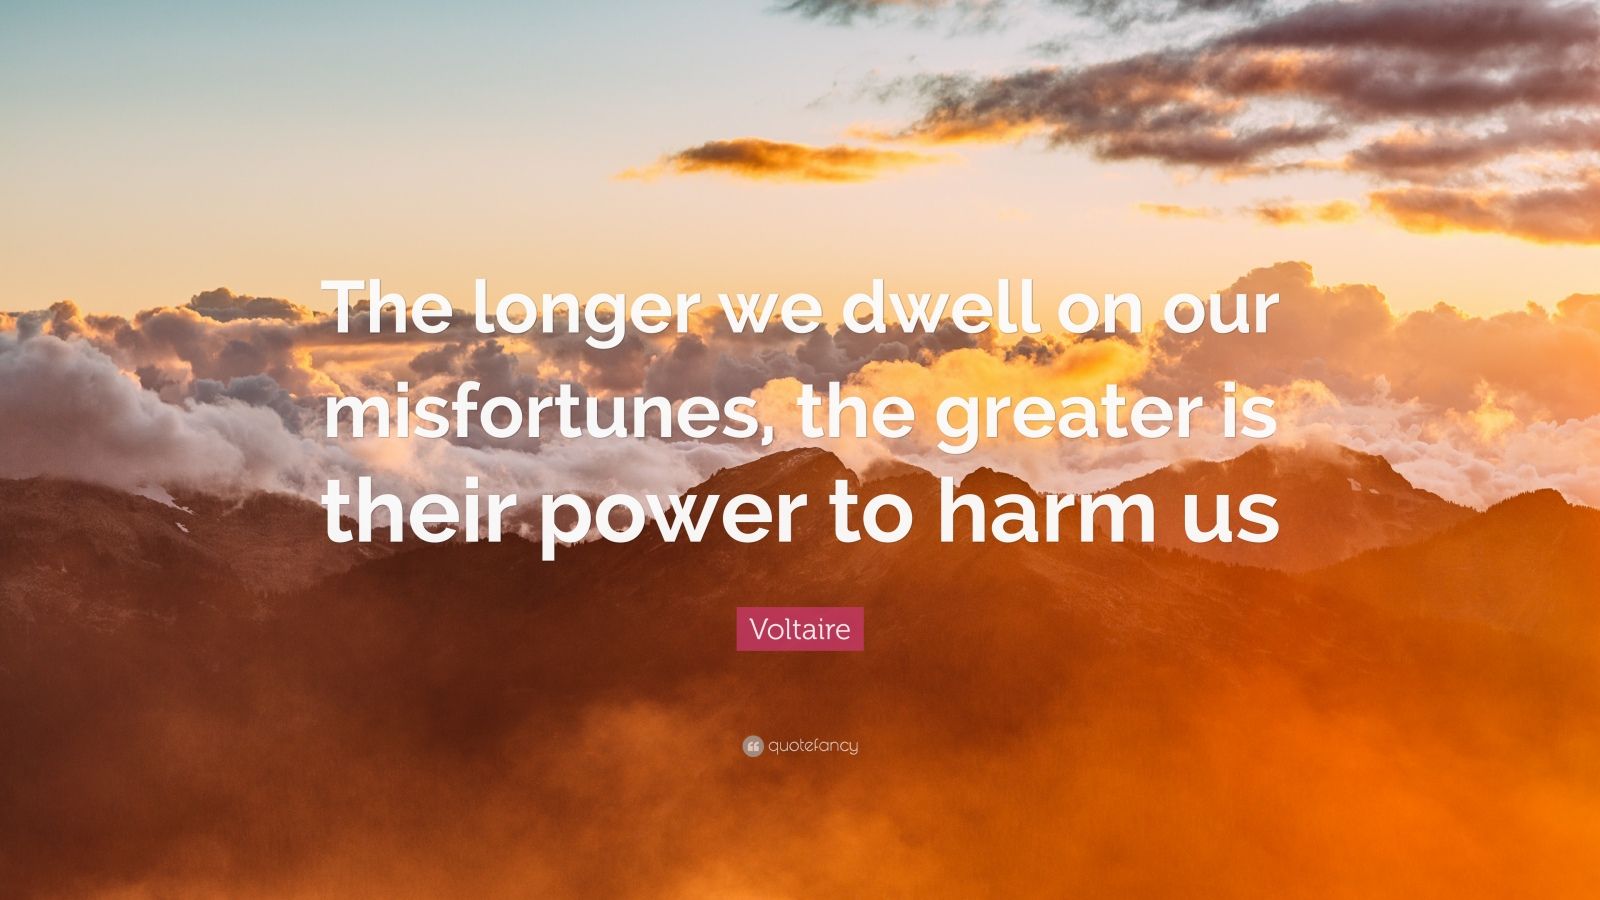 voltaire quote: "the longer we dwell on our misfortunes, the